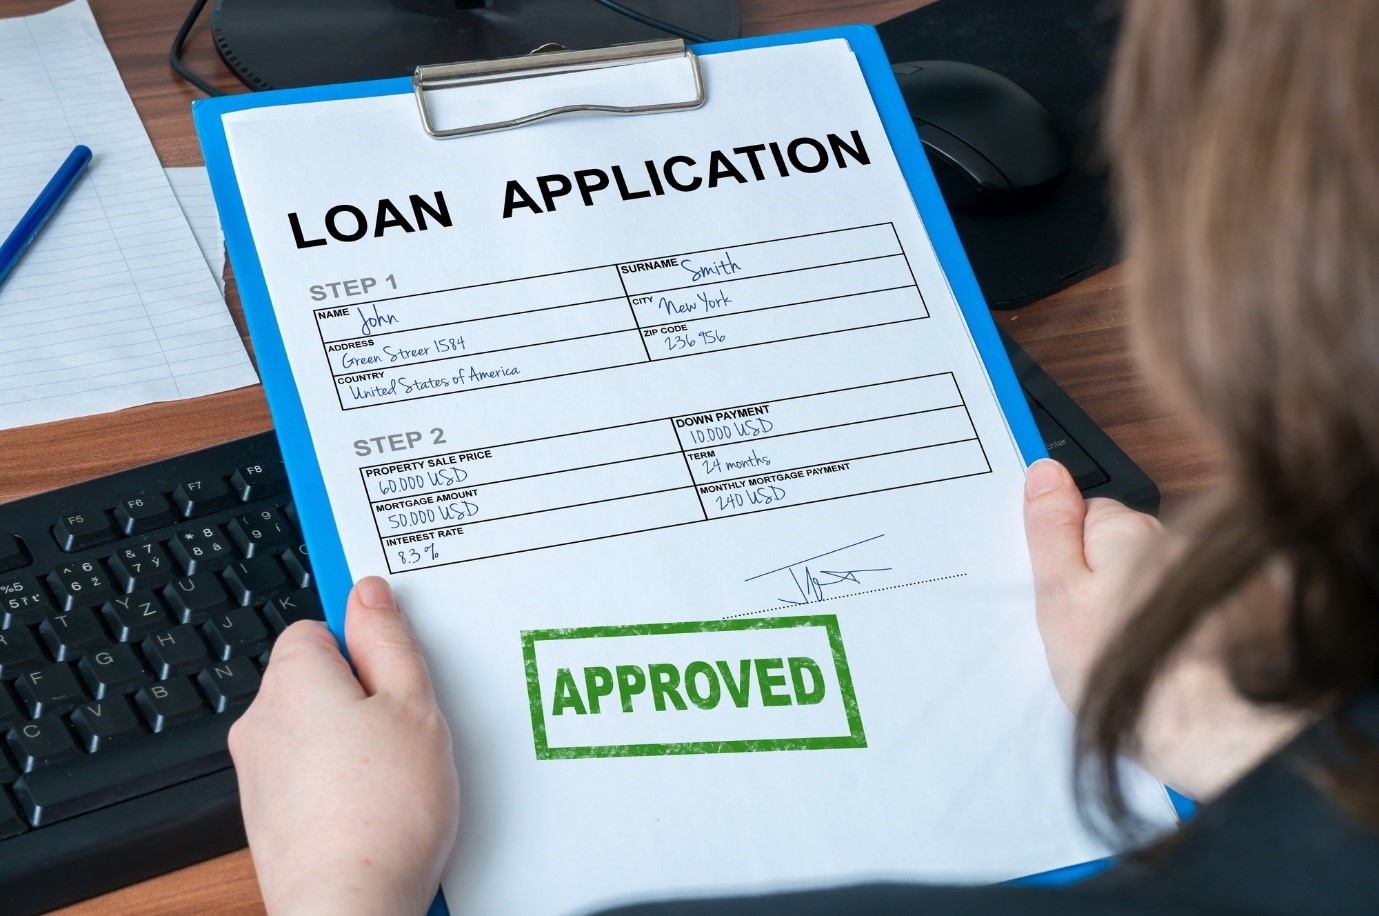 How to apply for how to get a large personal loan Best